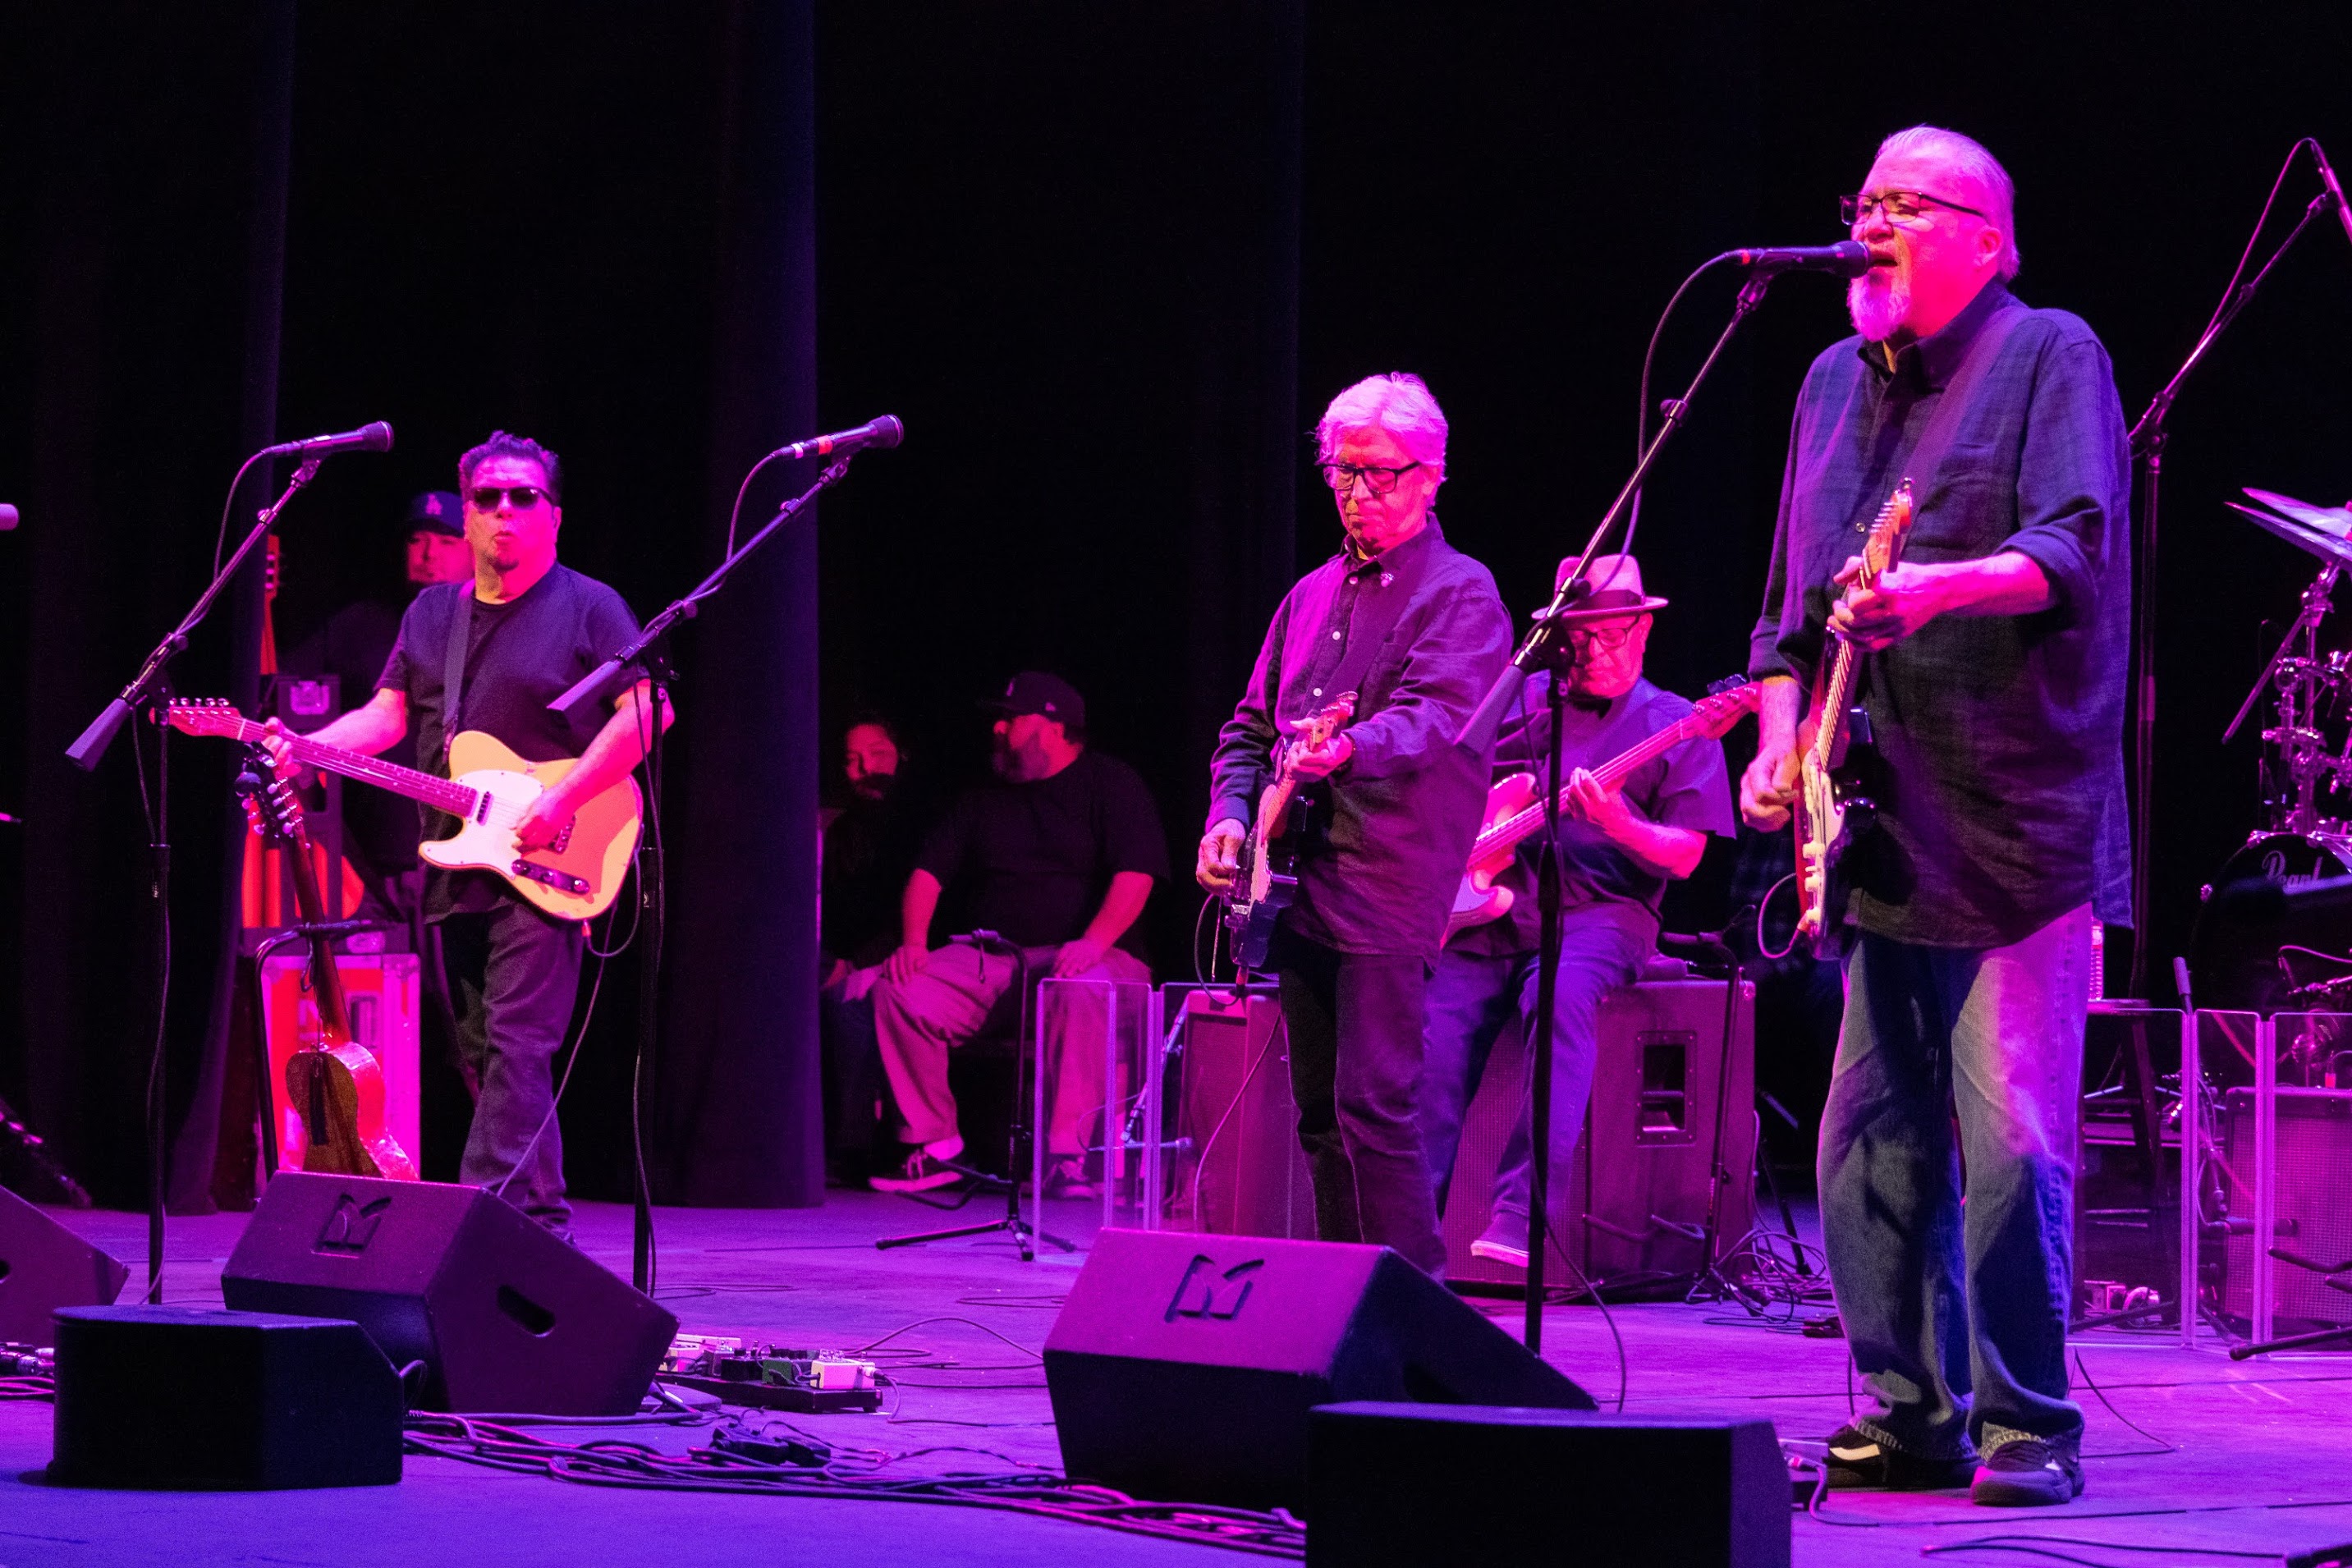 Los Lobos Performs Two Shows For Lobero Theatre's 150th Anniversary Series